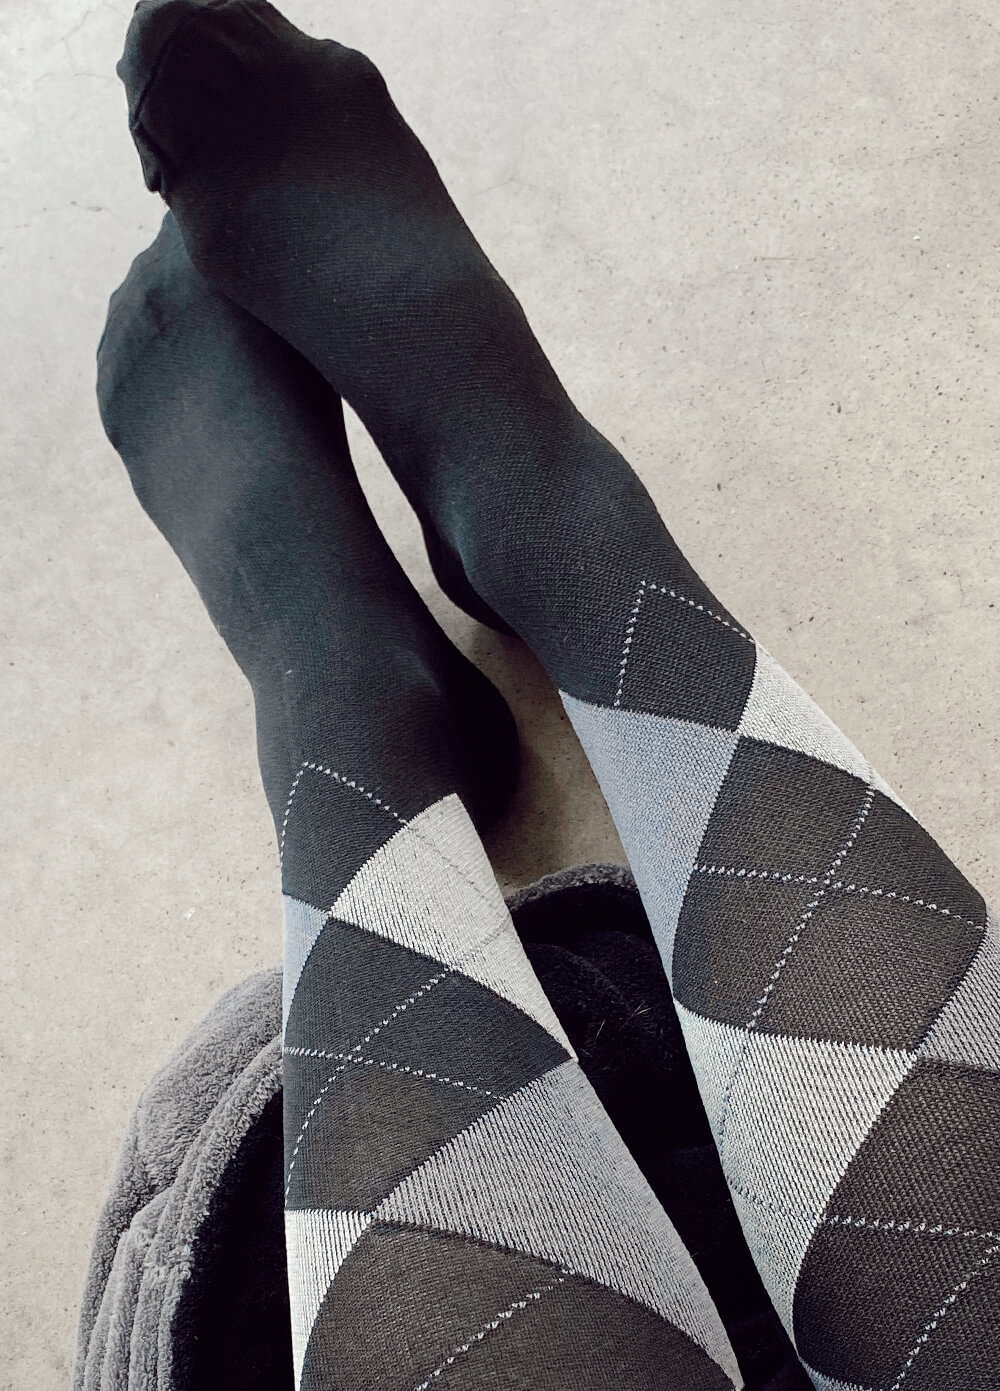 Mama Sox - Excite Maternity Compression Socks in Black Argyle